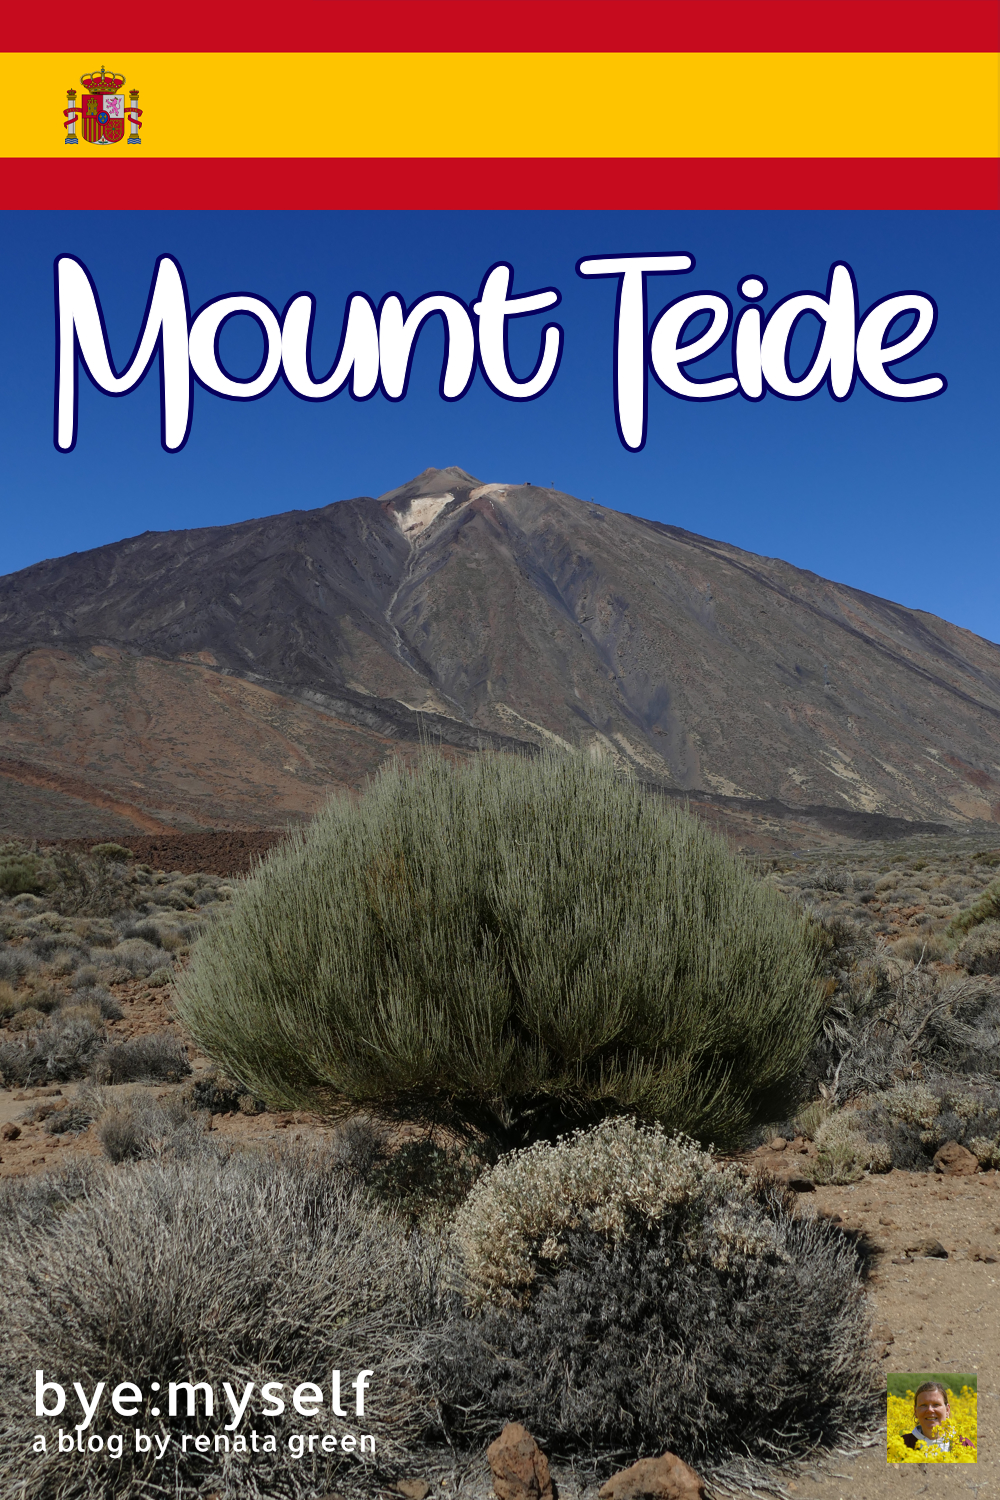 Pinnable Picture on the Post MOUNT TEIDE - the Highlight of Tenerife